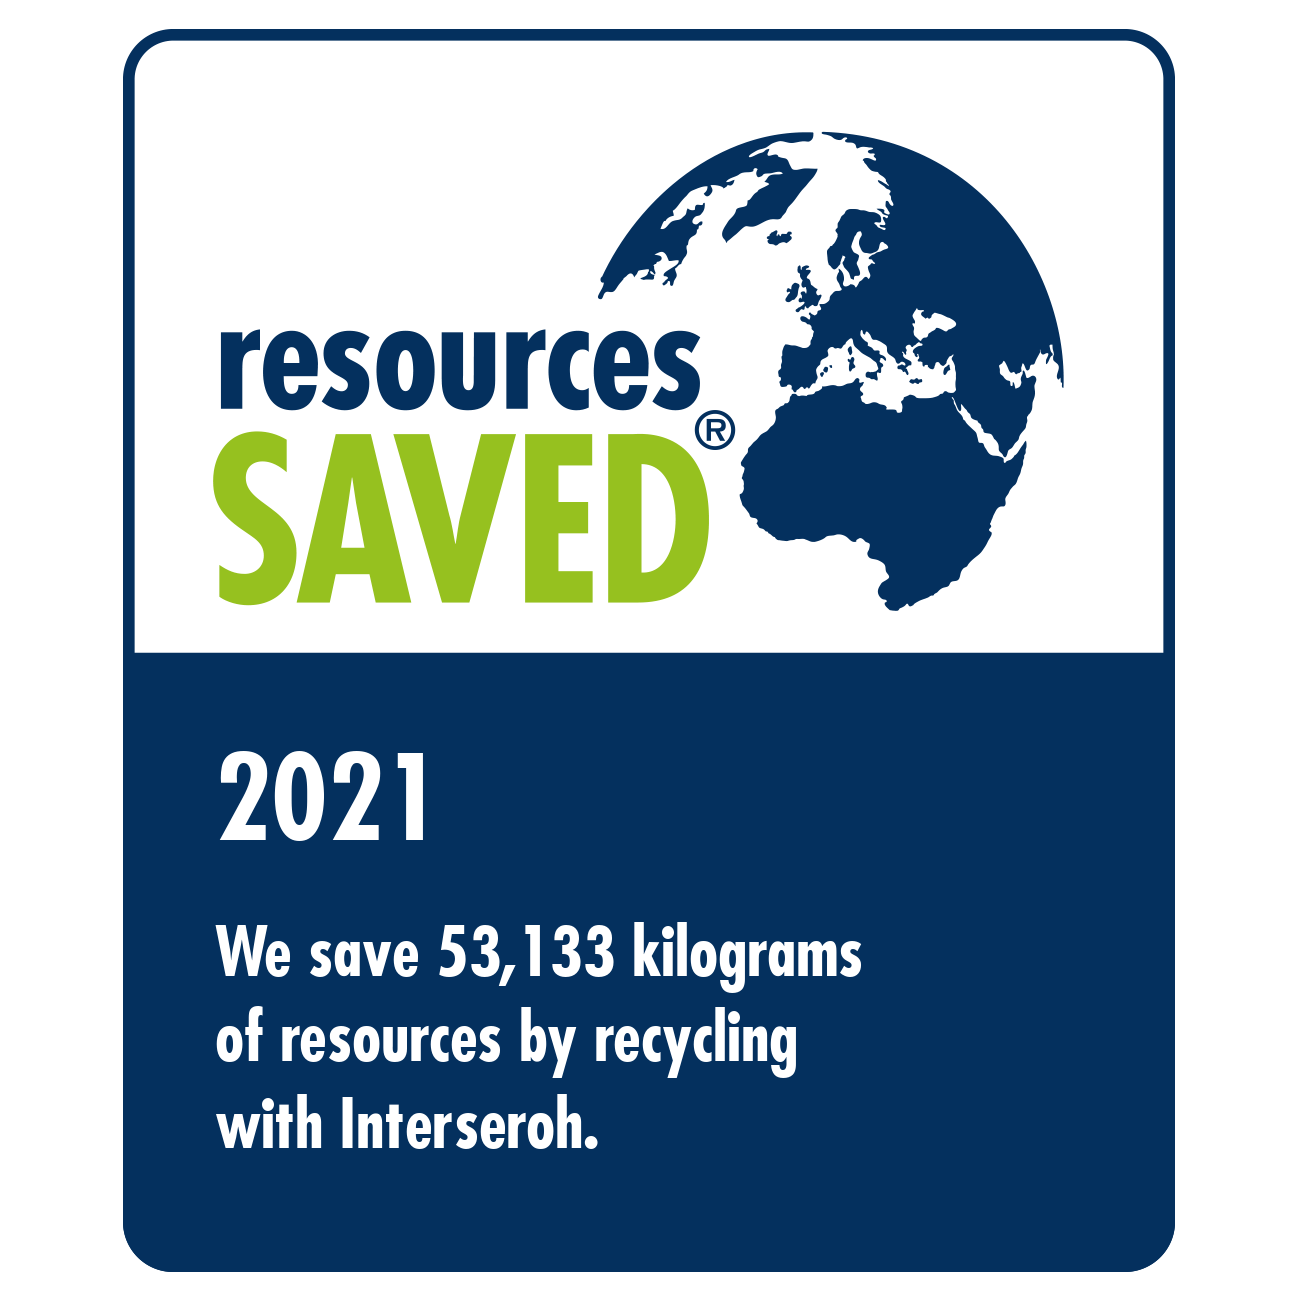 2021 - Saved resources by recycling